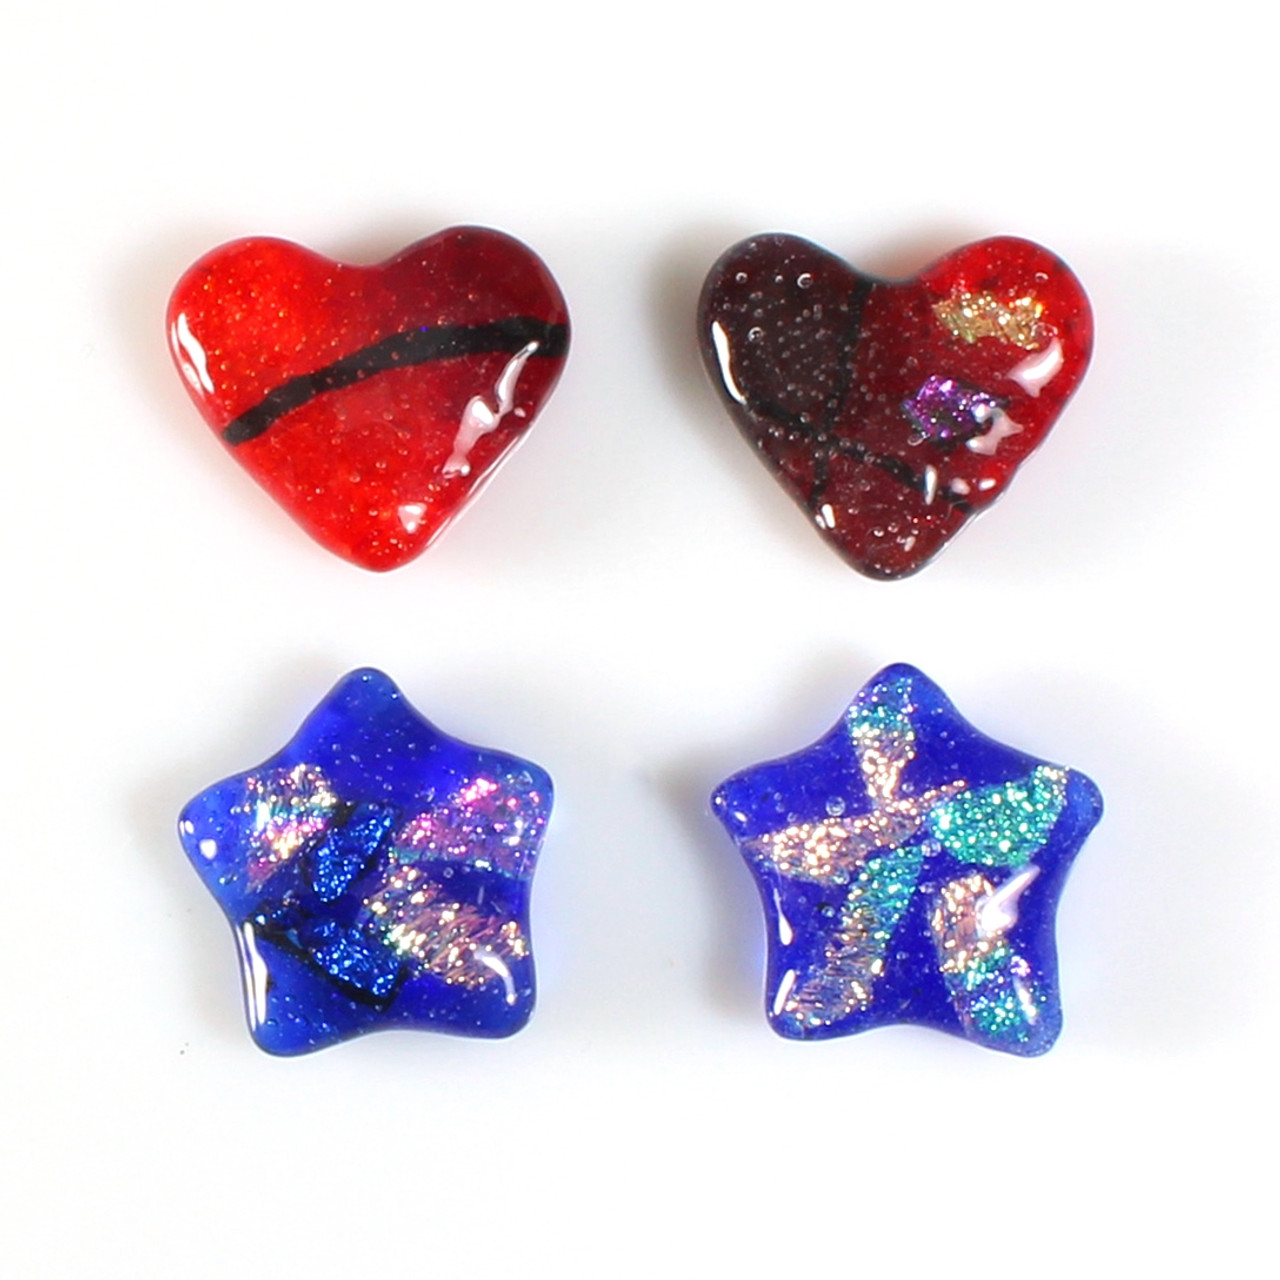 Pouring Your Heart Out Puffy Heart Mold - Starfish Pendants! Wow